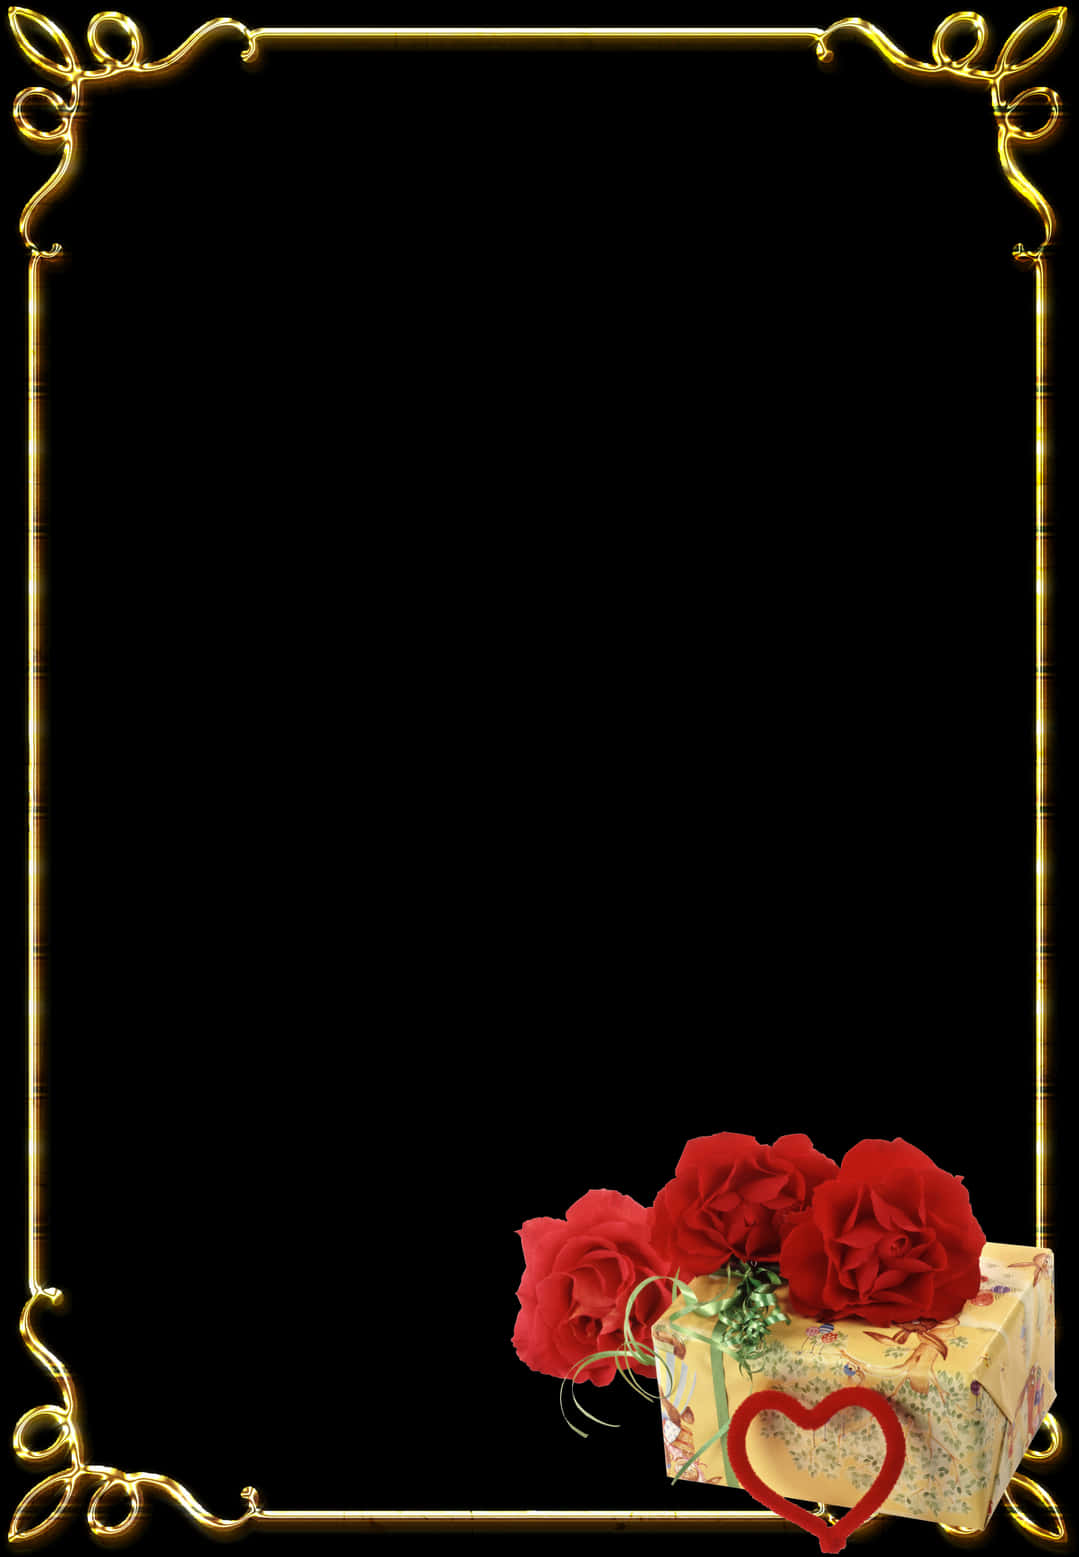 A Frame With Roses And A Black Background